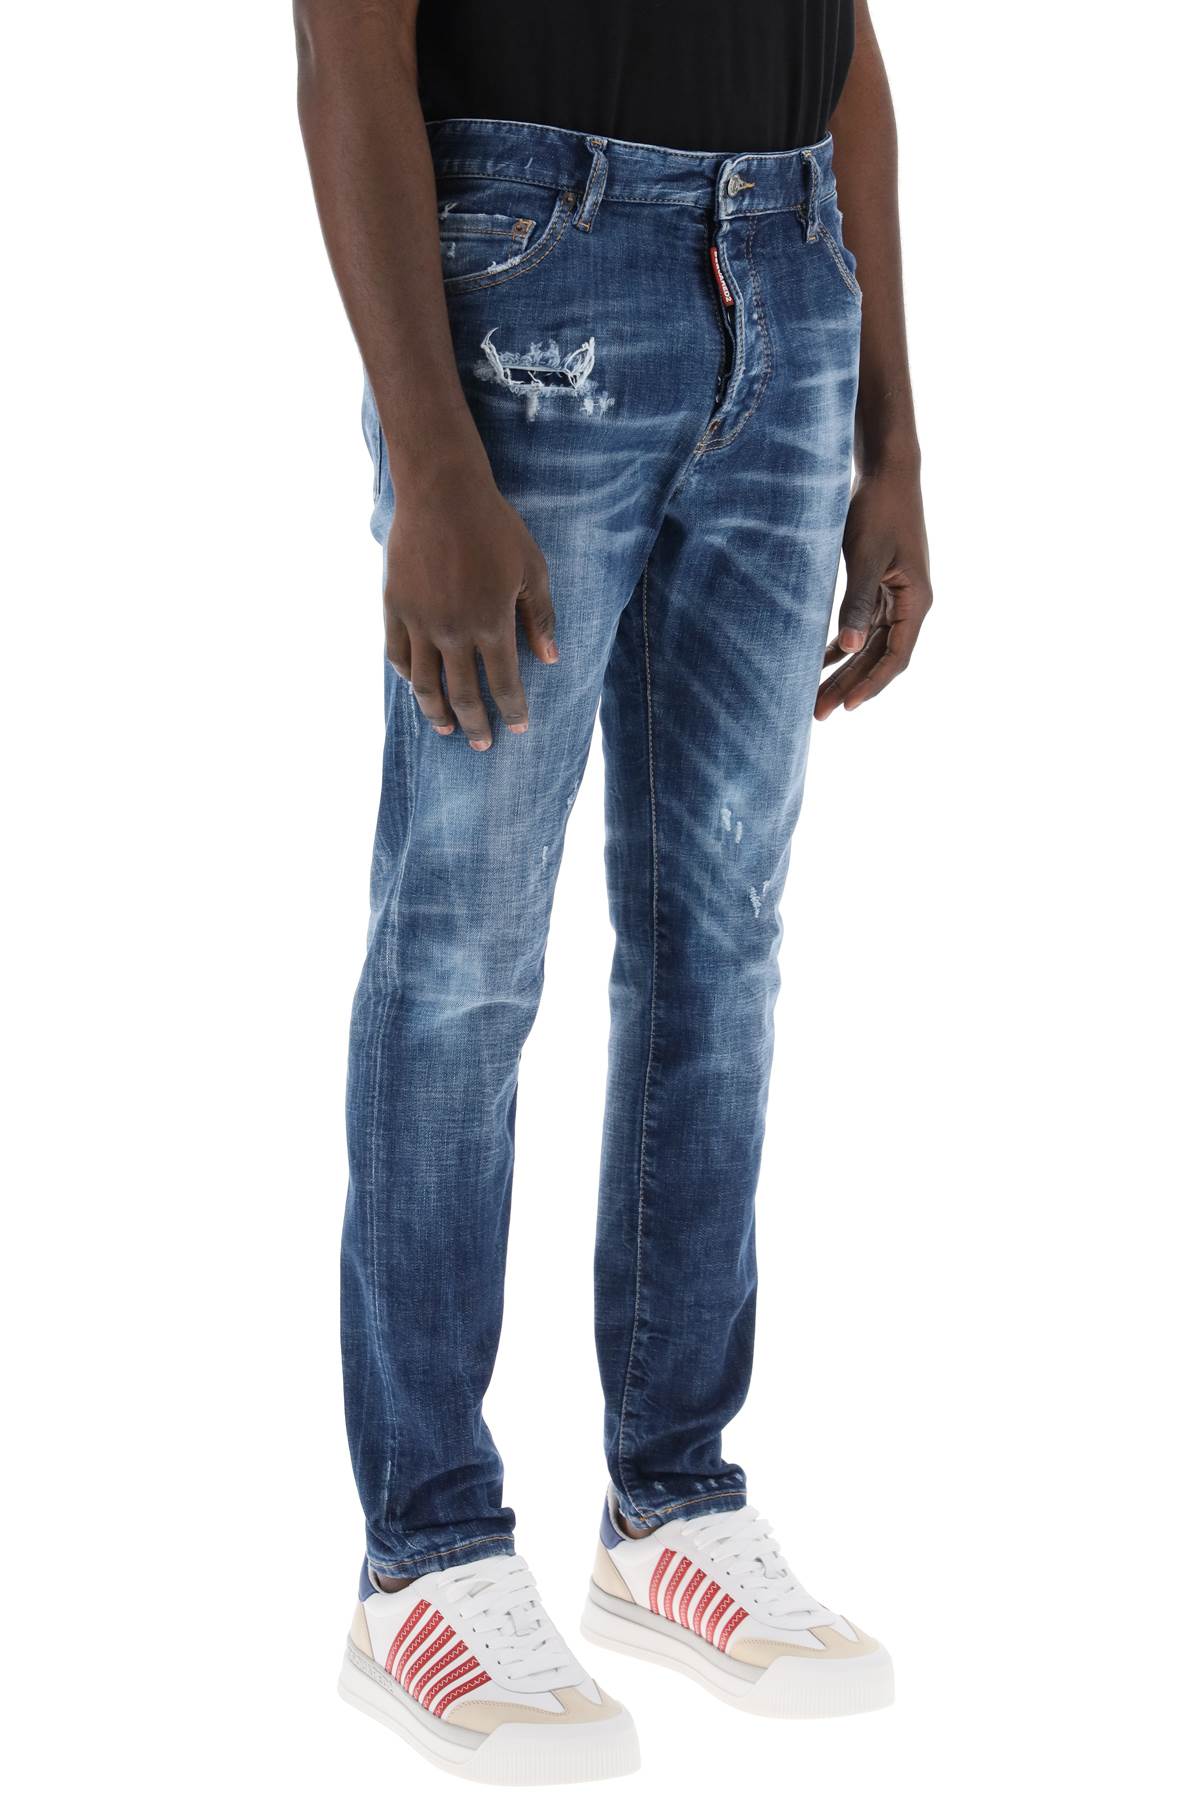 Dsquared2 jeans cool guy in dark 70's wash-1